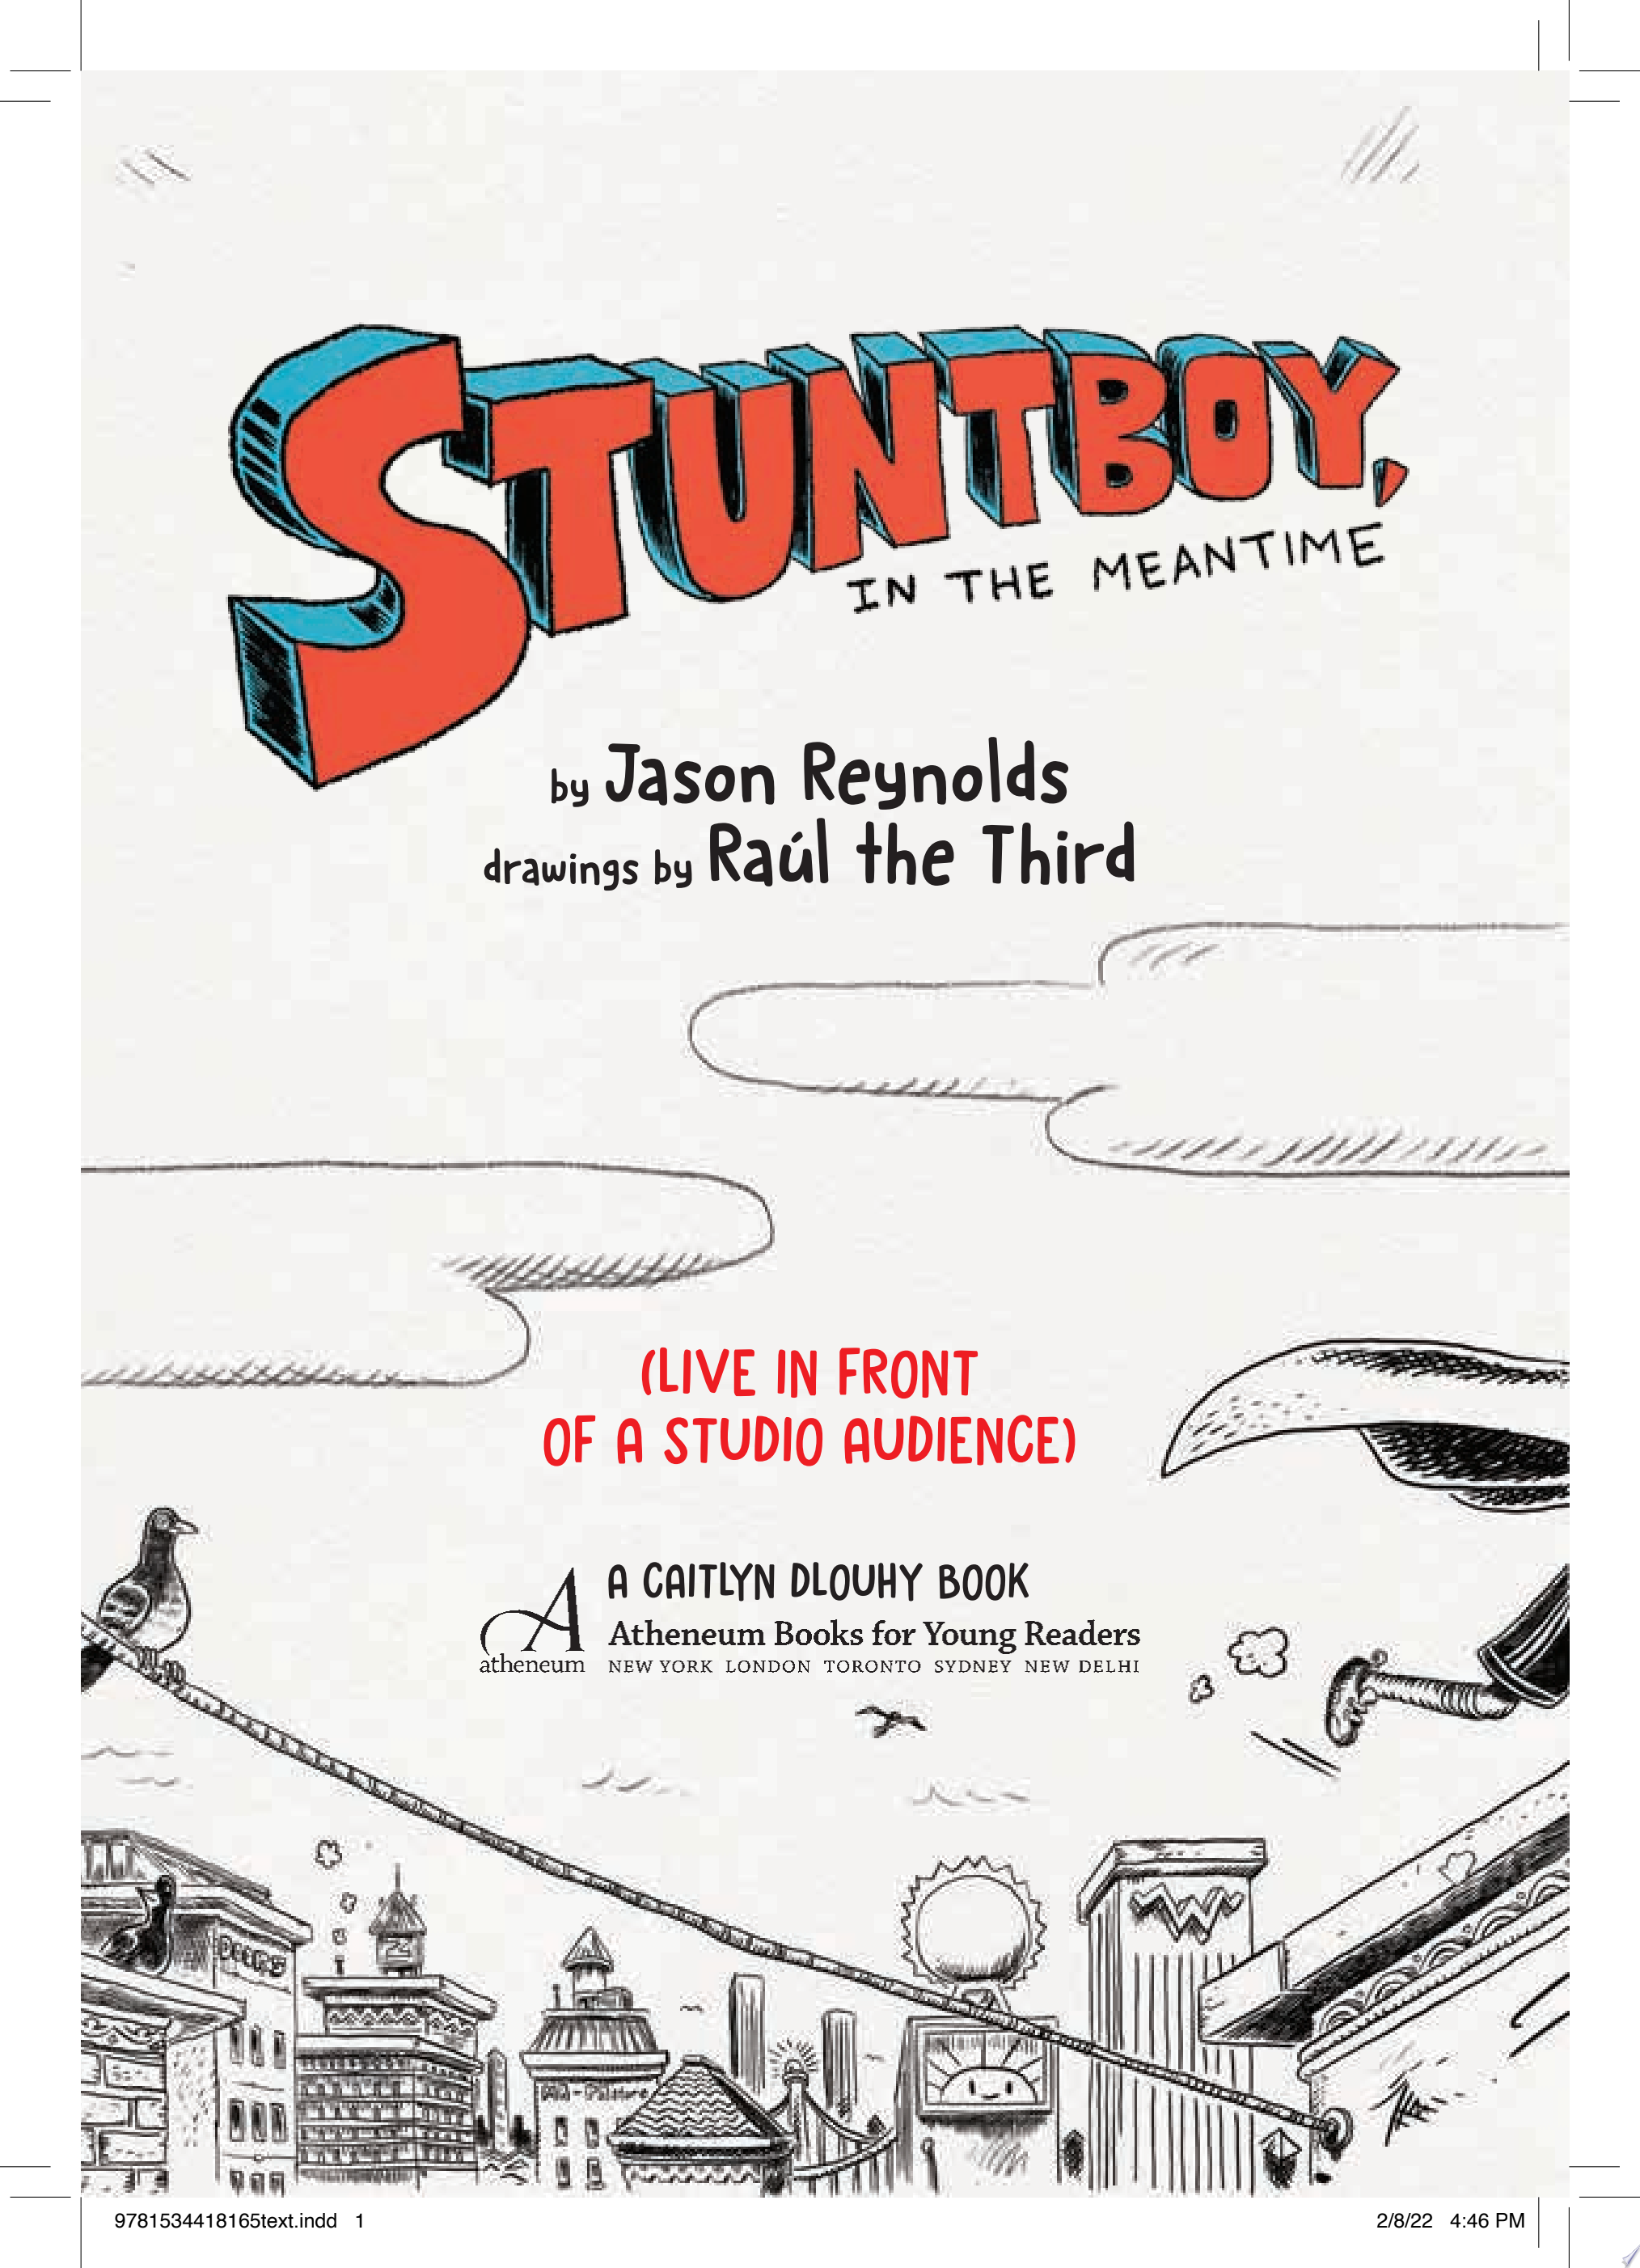 Image for "Stuntboy, in the Meantime"